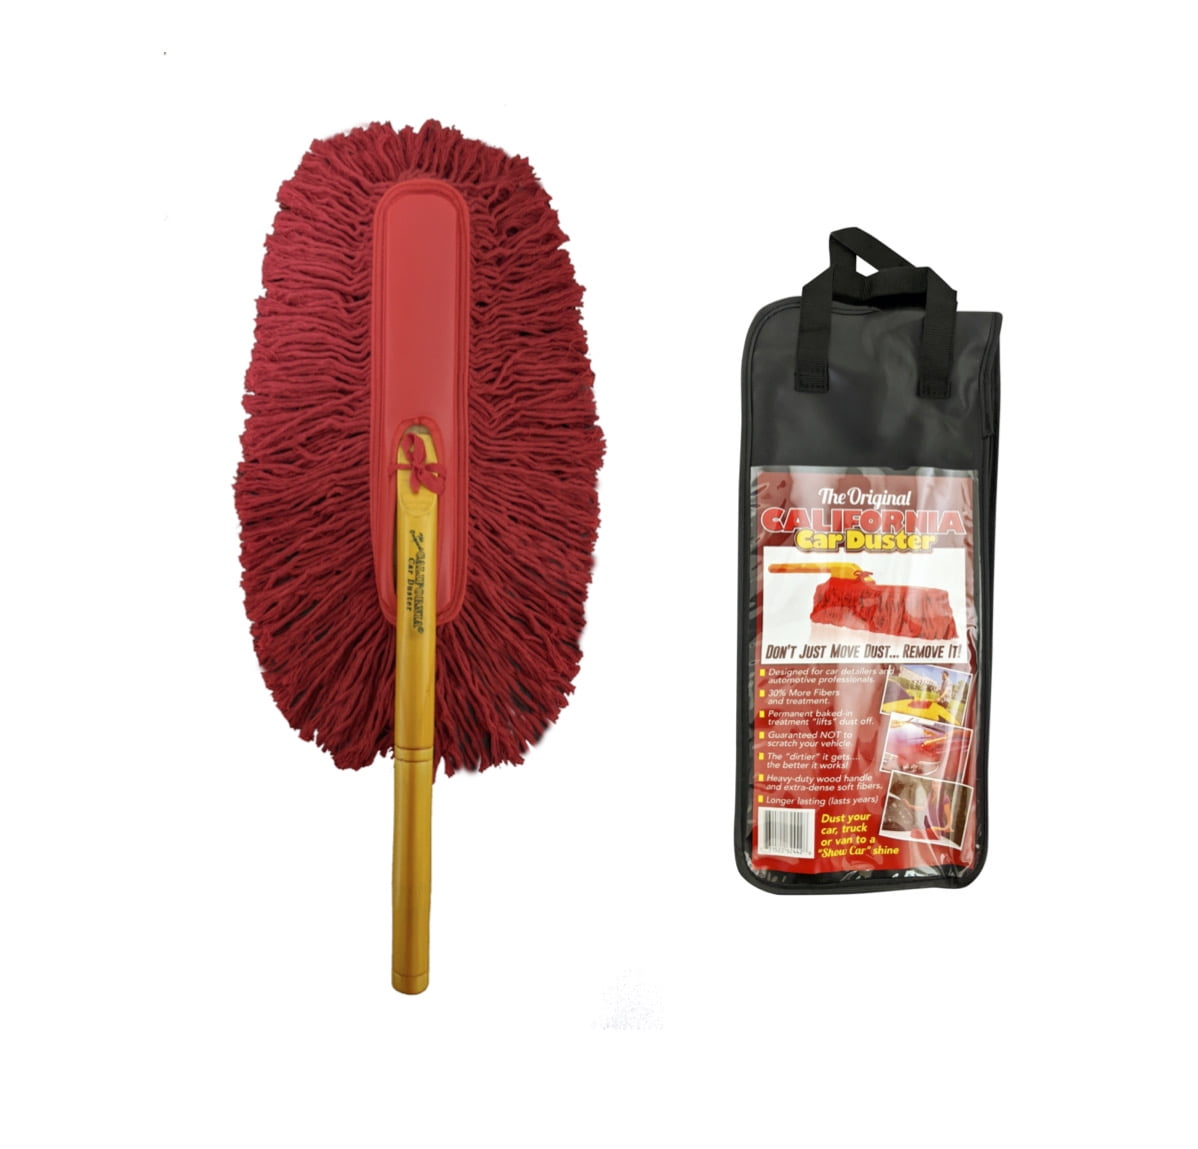  The Original California Car Duster California Car Duster 62443  Standard Car Duster with Plastic Handle, Red 25 Inch : Automotive